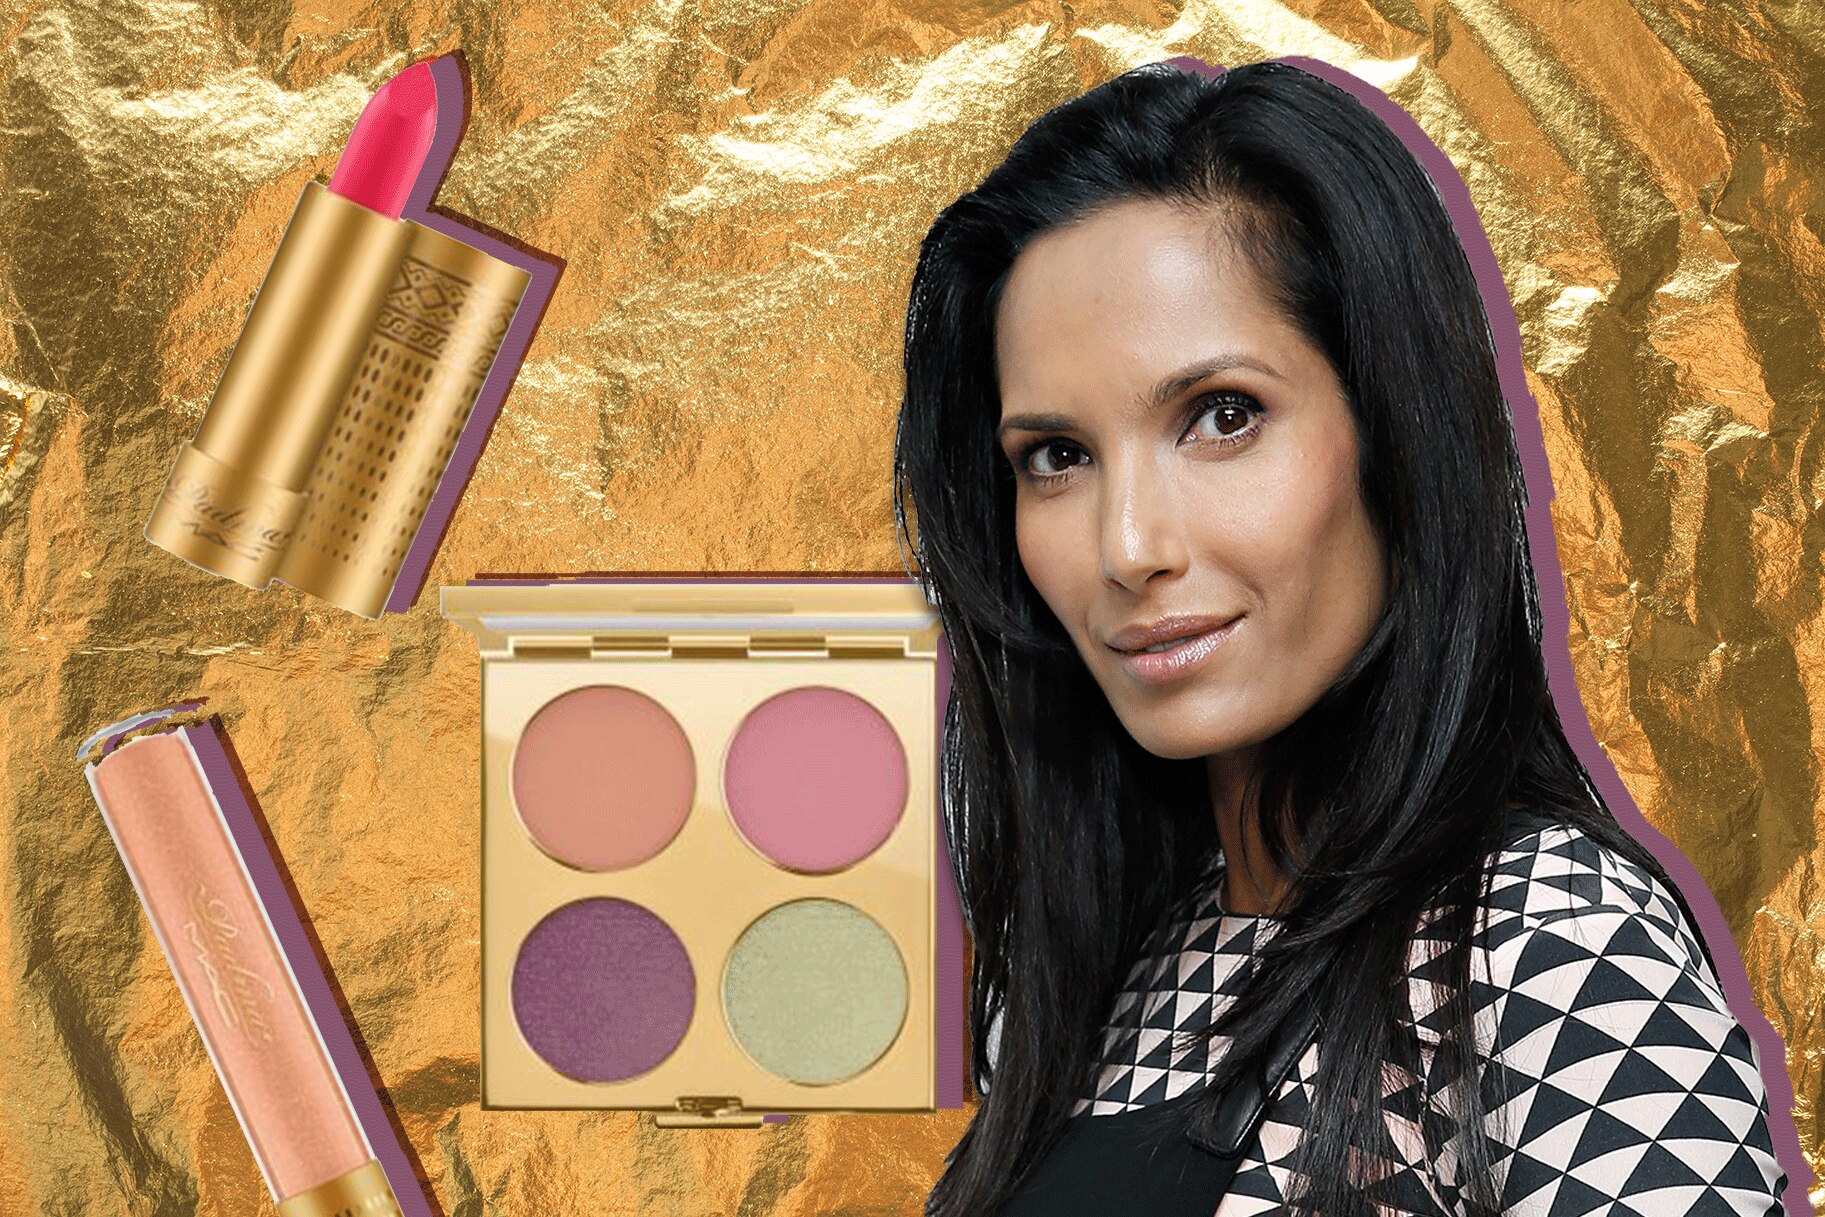 Top Chef's Padma Lakshmi's MAC Collection: See the Products | Lookbook1825 x 1217